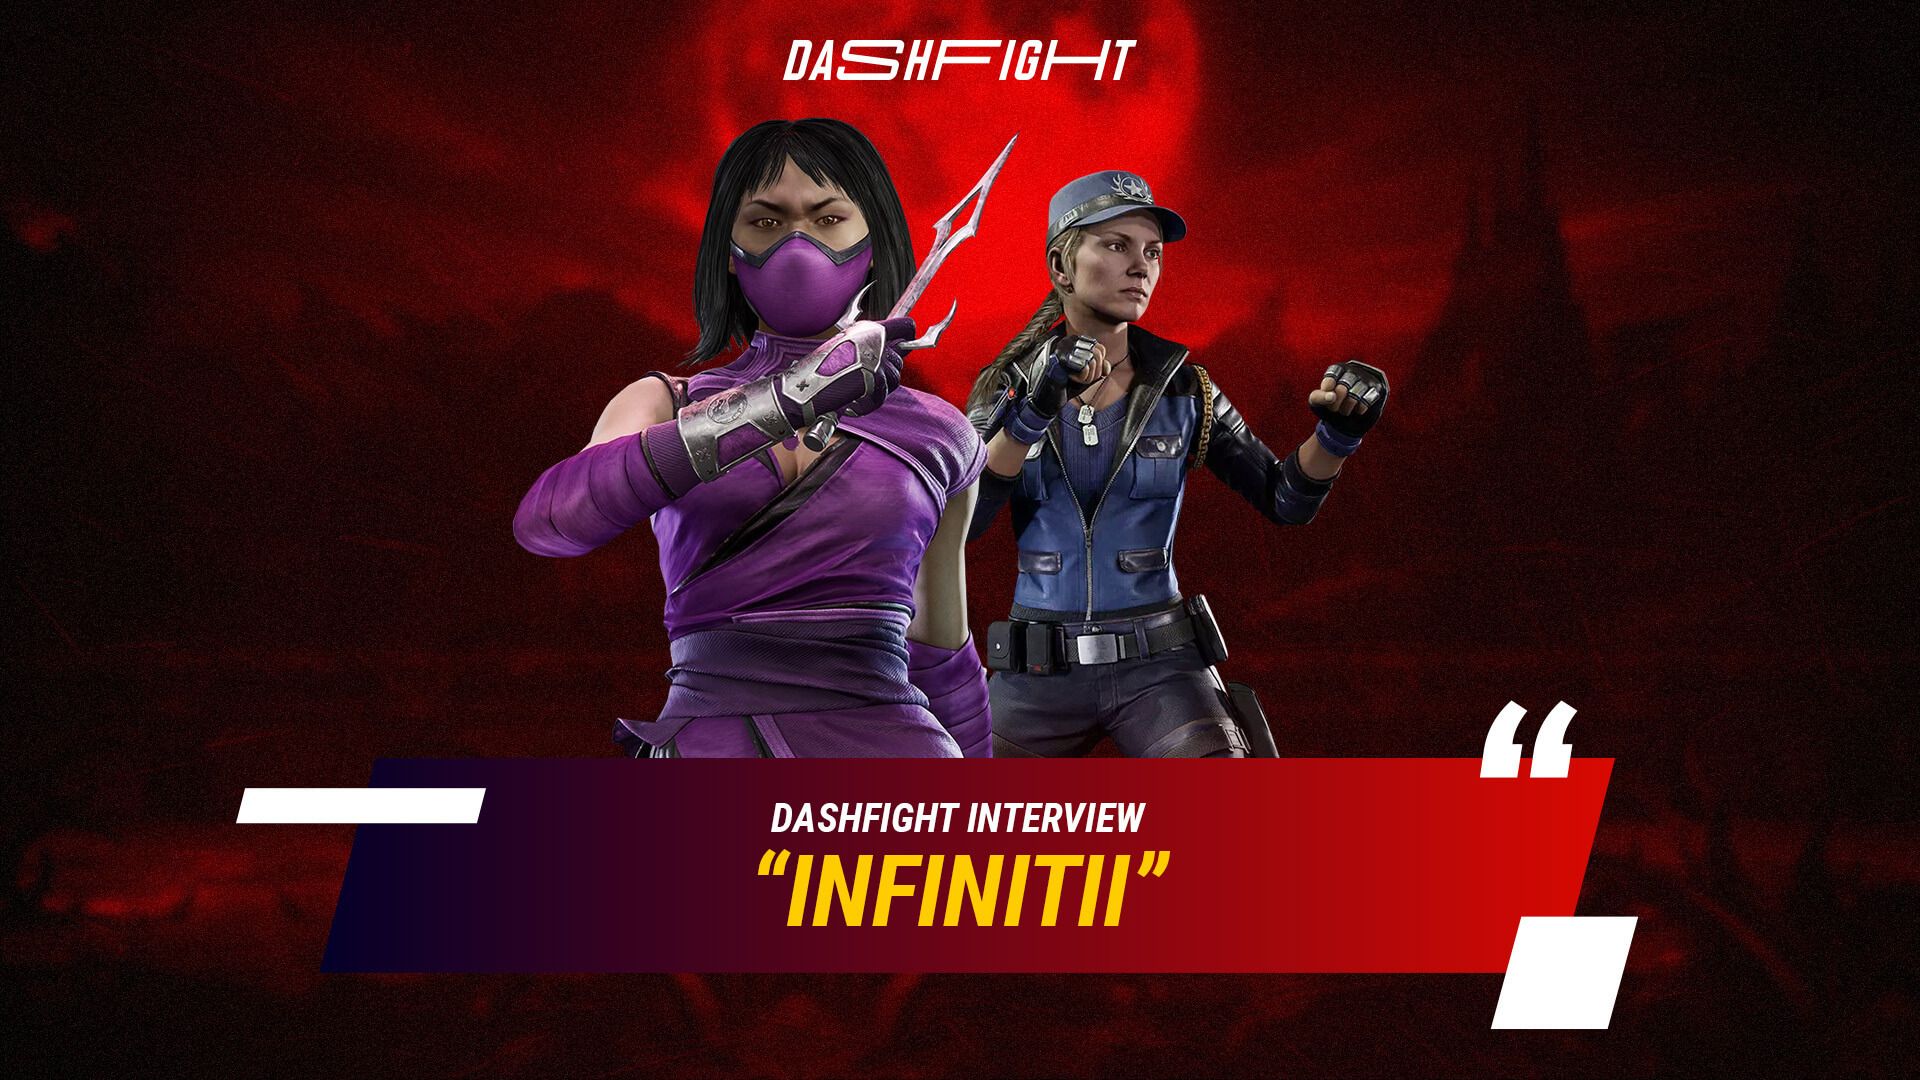 Infinitii: On Cosplay, FGC Closeness, and MK11